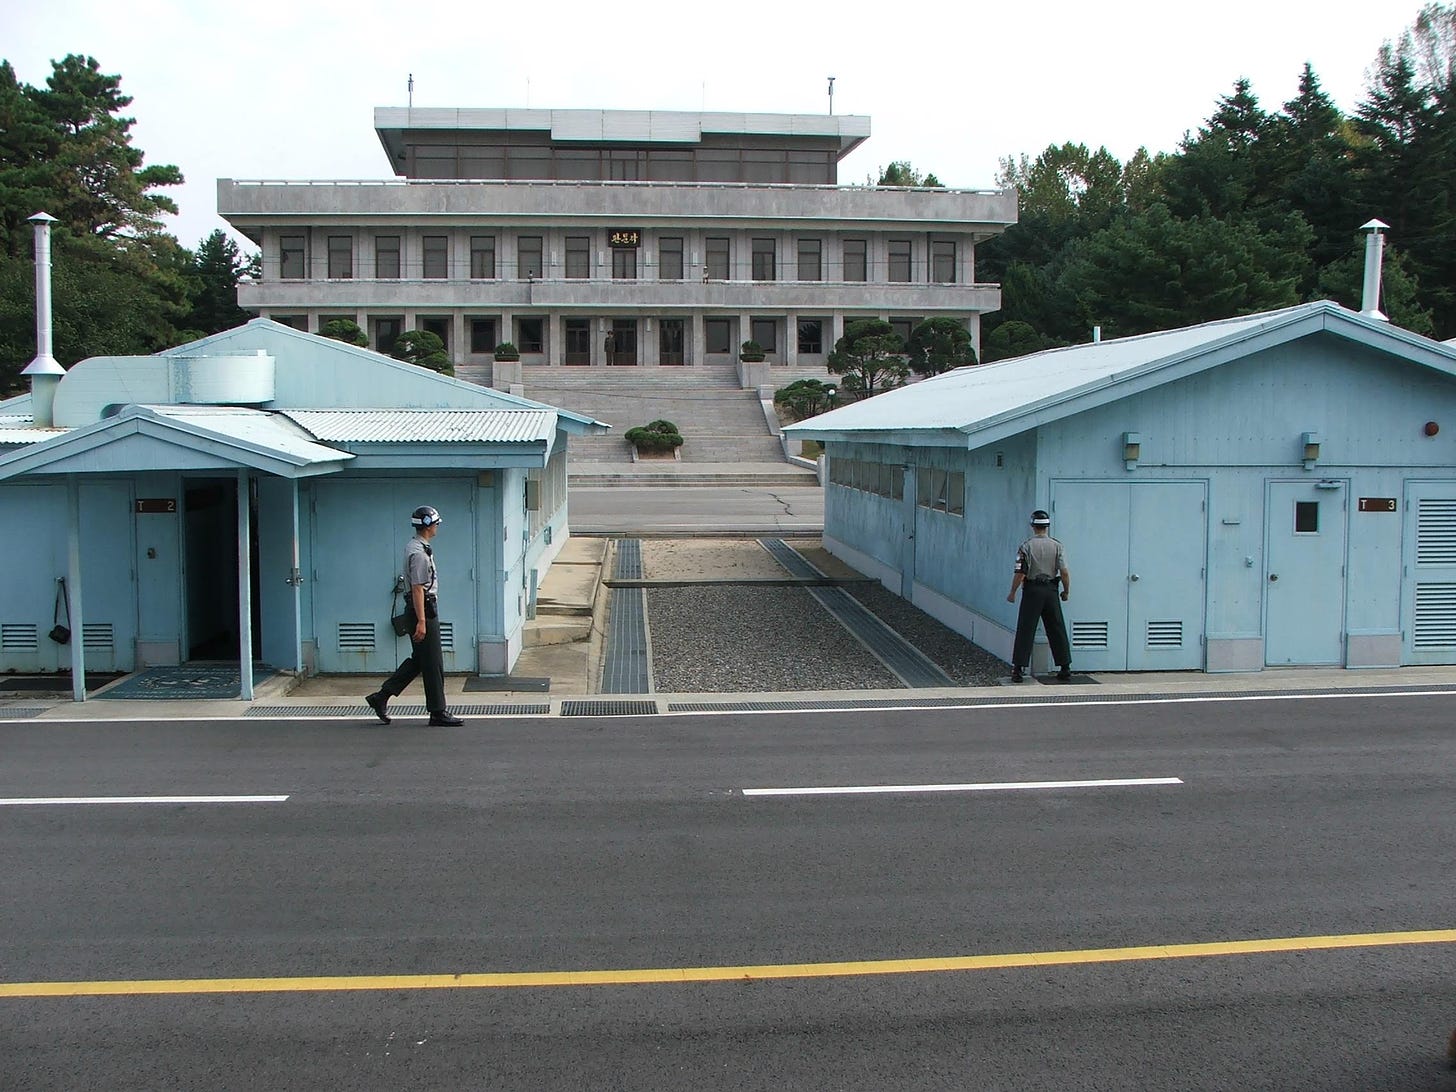 Joint Security Area, 2006, author's photograph